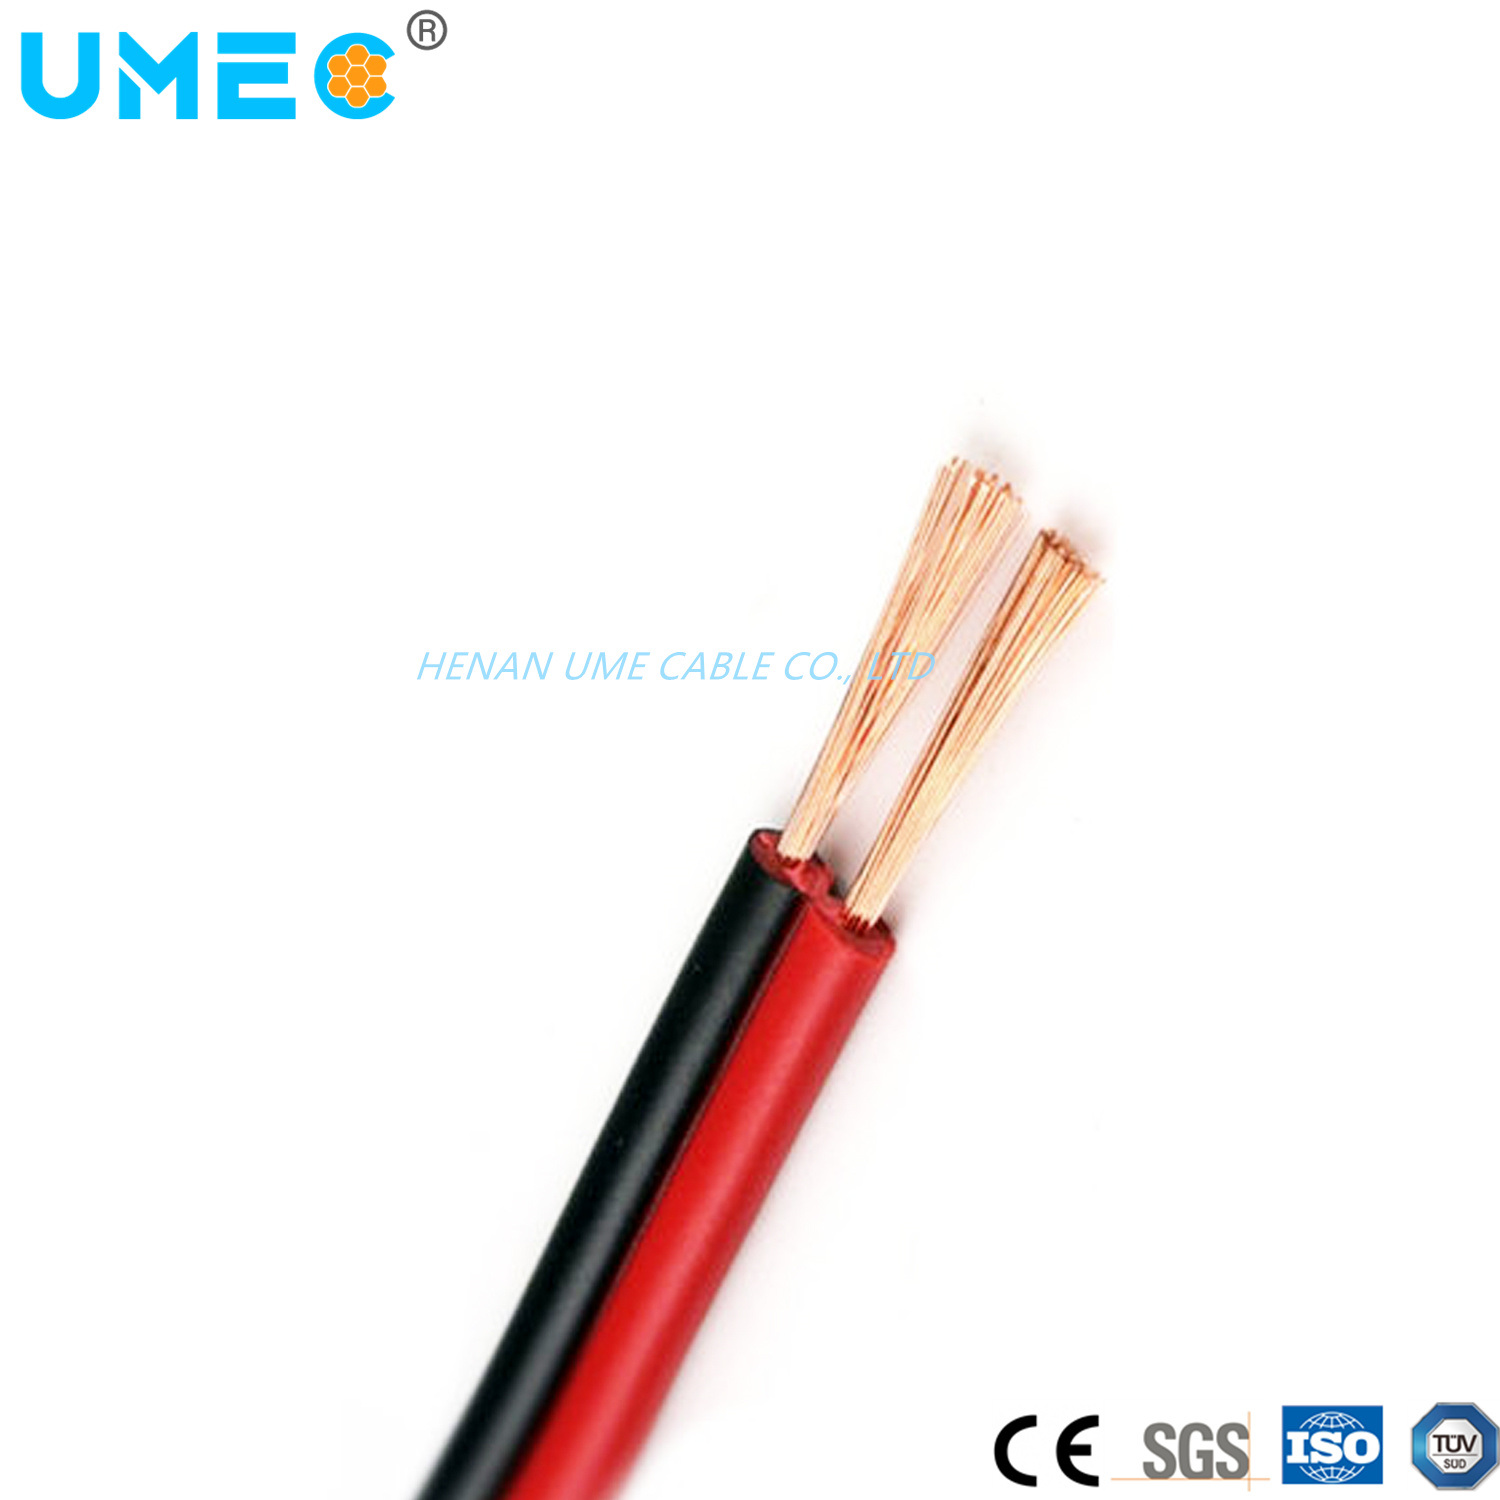 Copper or Tinned Copper Conductor Non-Sheathed Twin Core Spt Cable, Flexible Parallel Cable 14 18 AWG Lamp Building Wire